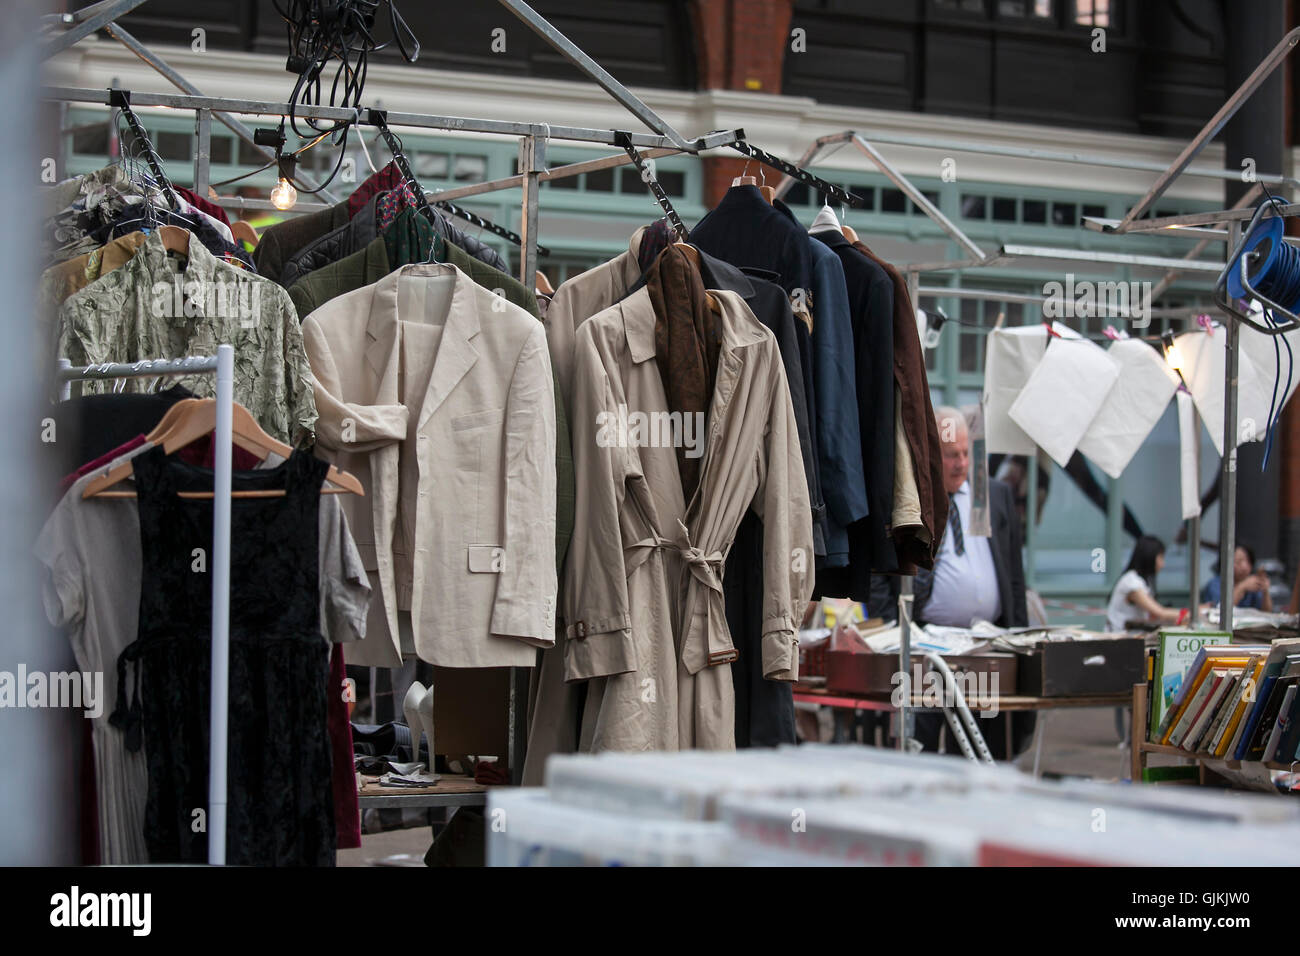 Spitalfields Antic Market. vintage outerwear, coats hanging on a rack Stock Photo